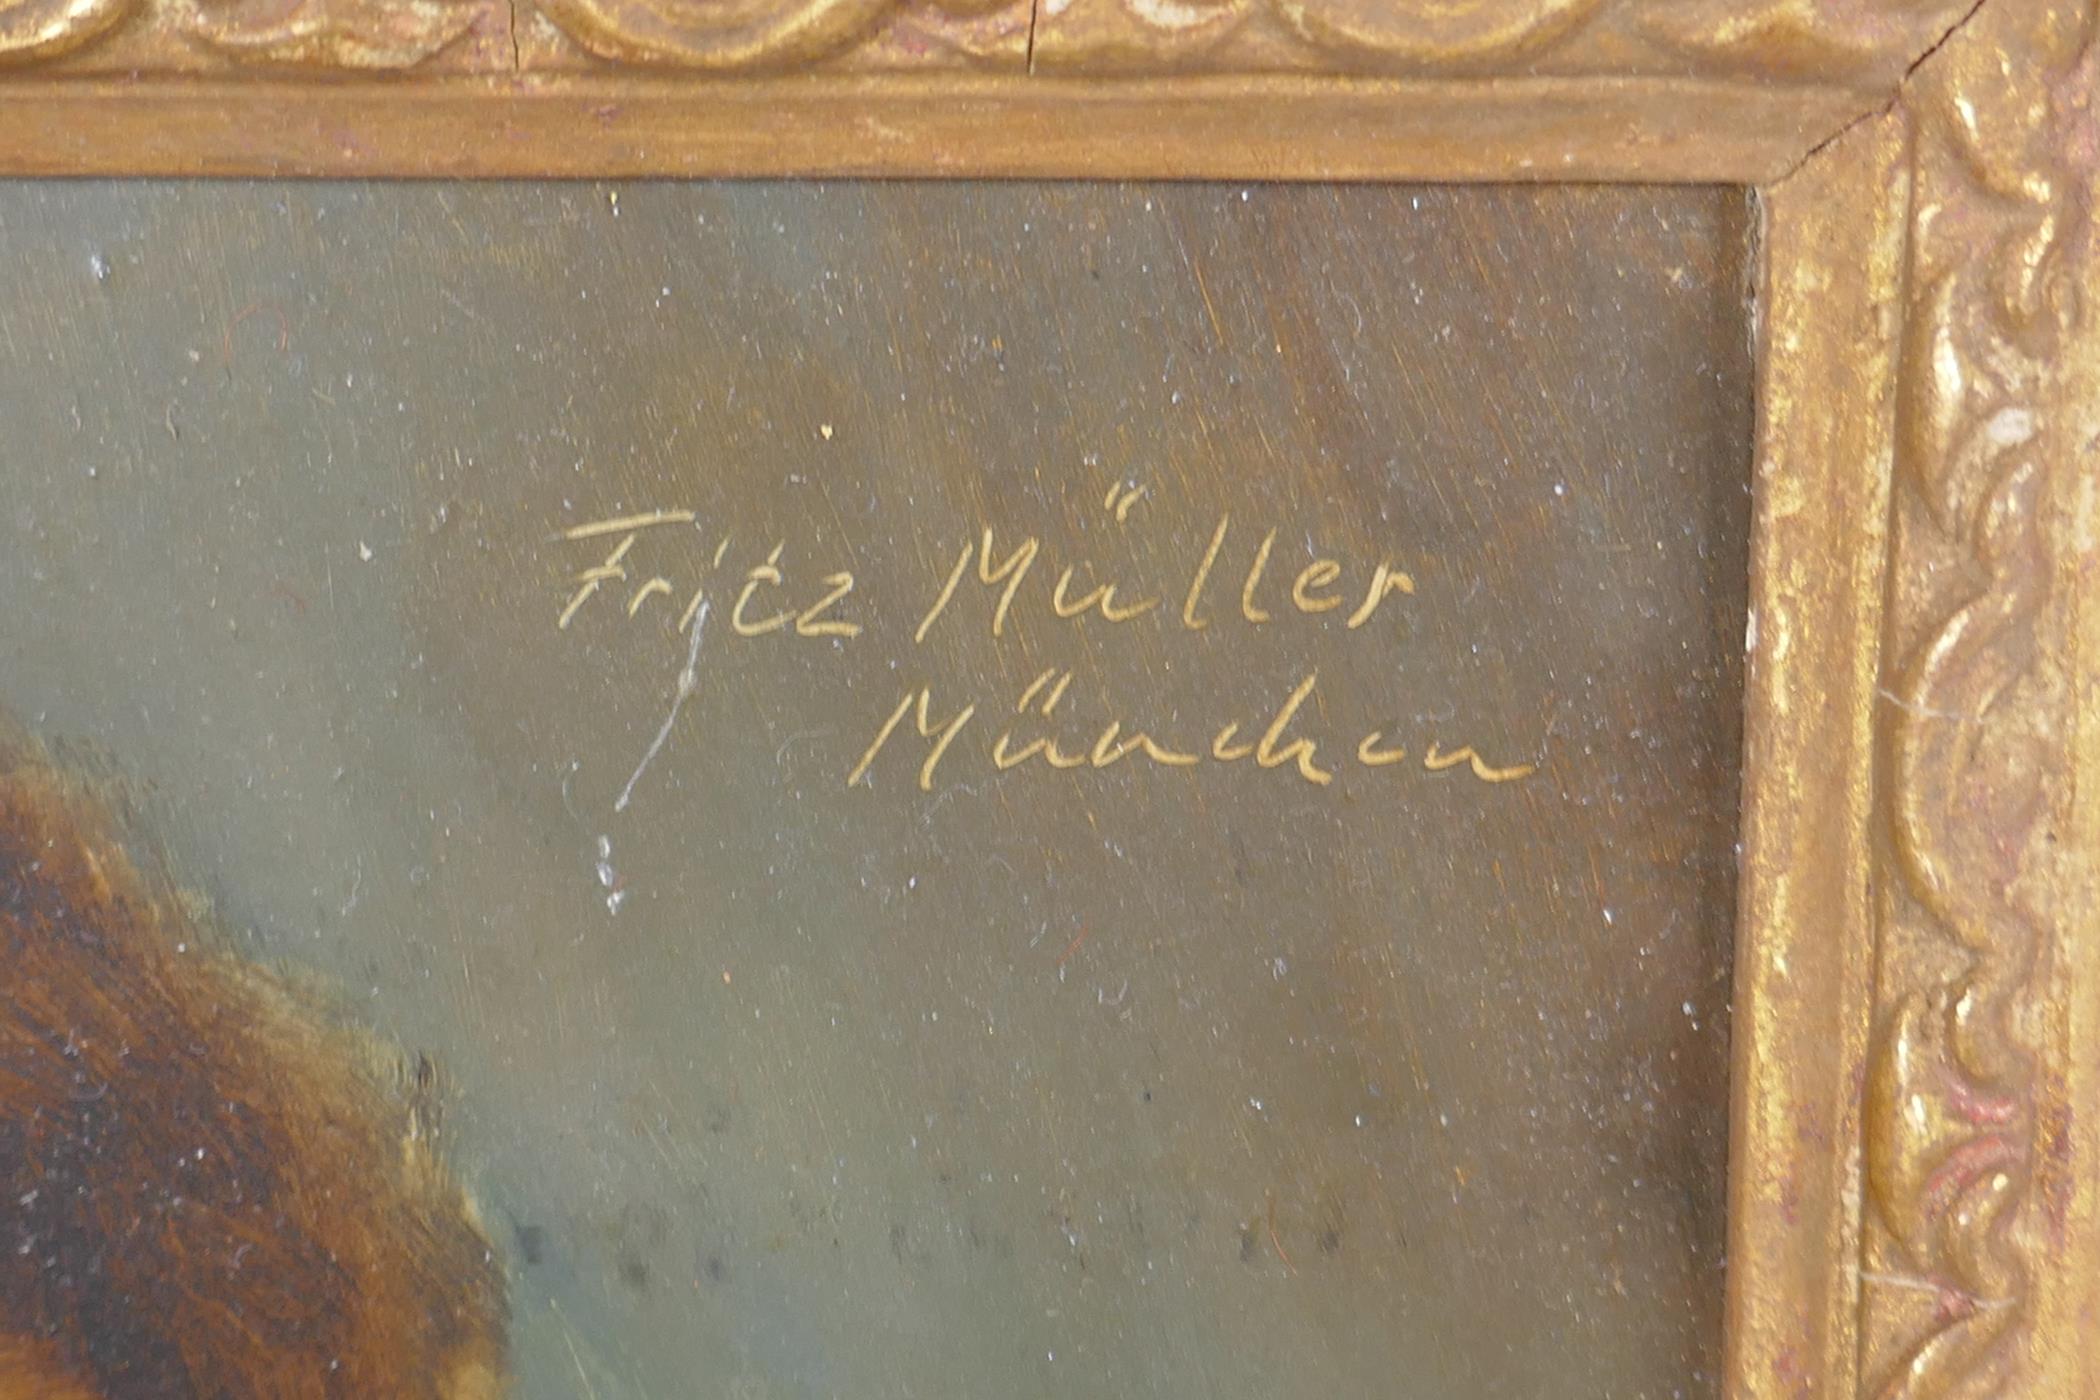 Fritz Muller, the wine drinker and coffee drinker, signed Fritz Muller, Munchen, oils on board, in - Image 3 of 5